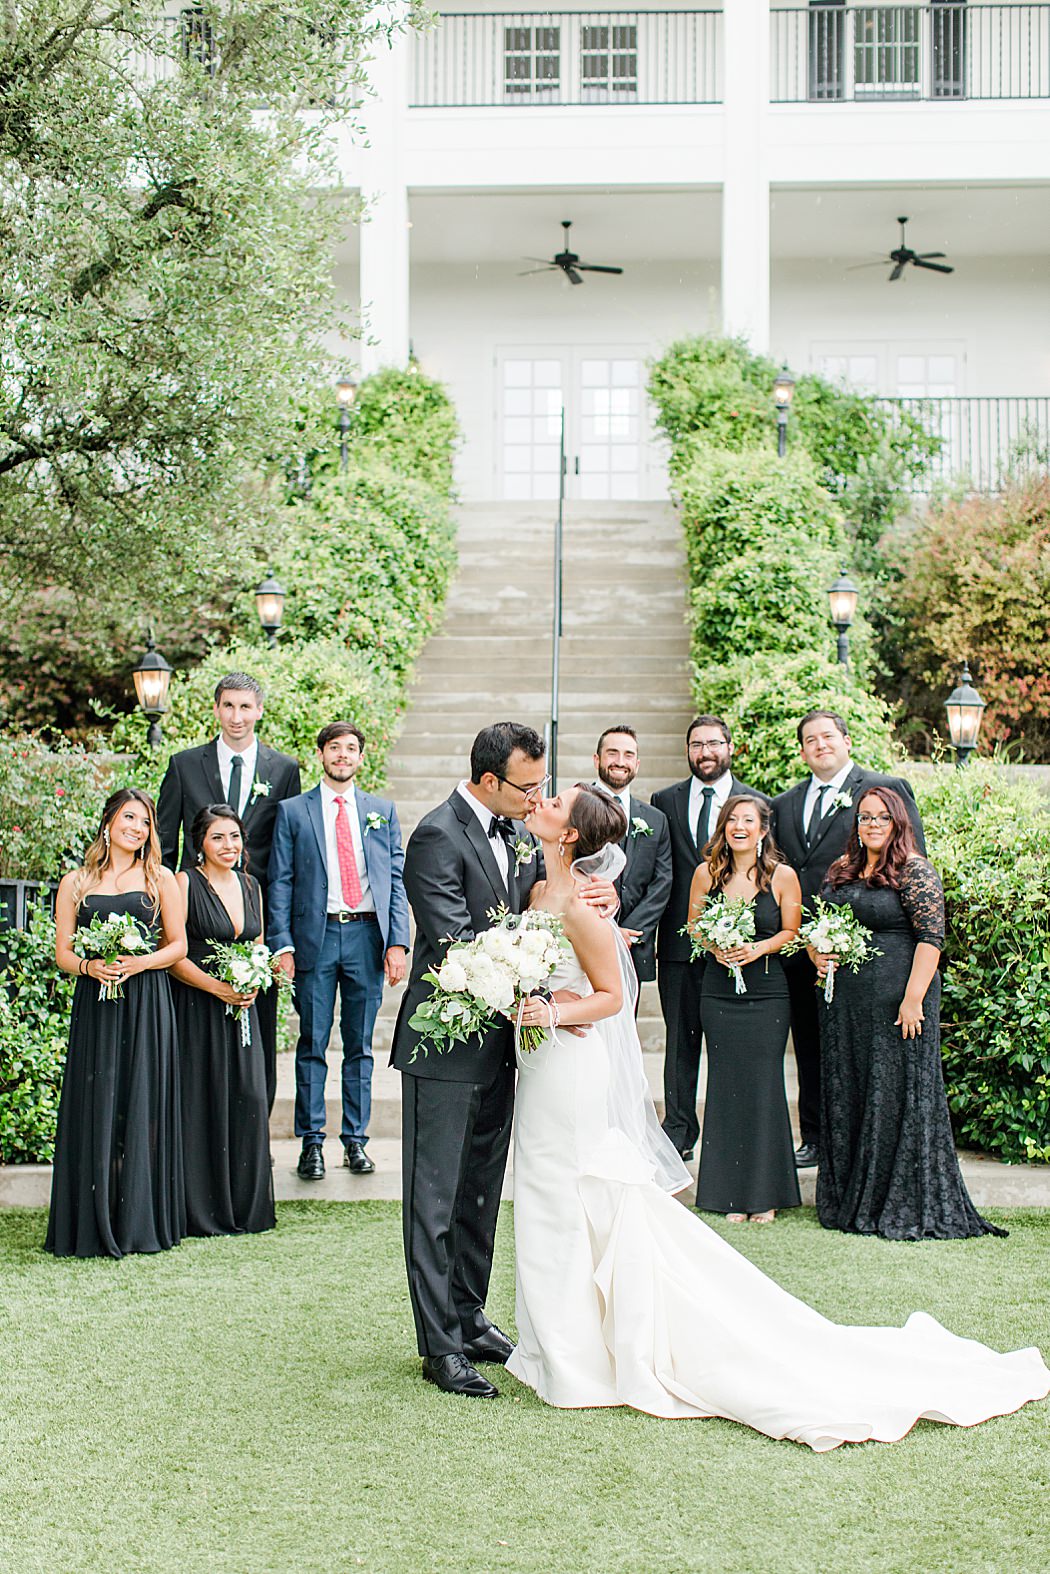 A Black and White Summer wedding at Kendall Point venue in Boerne Texas 0035